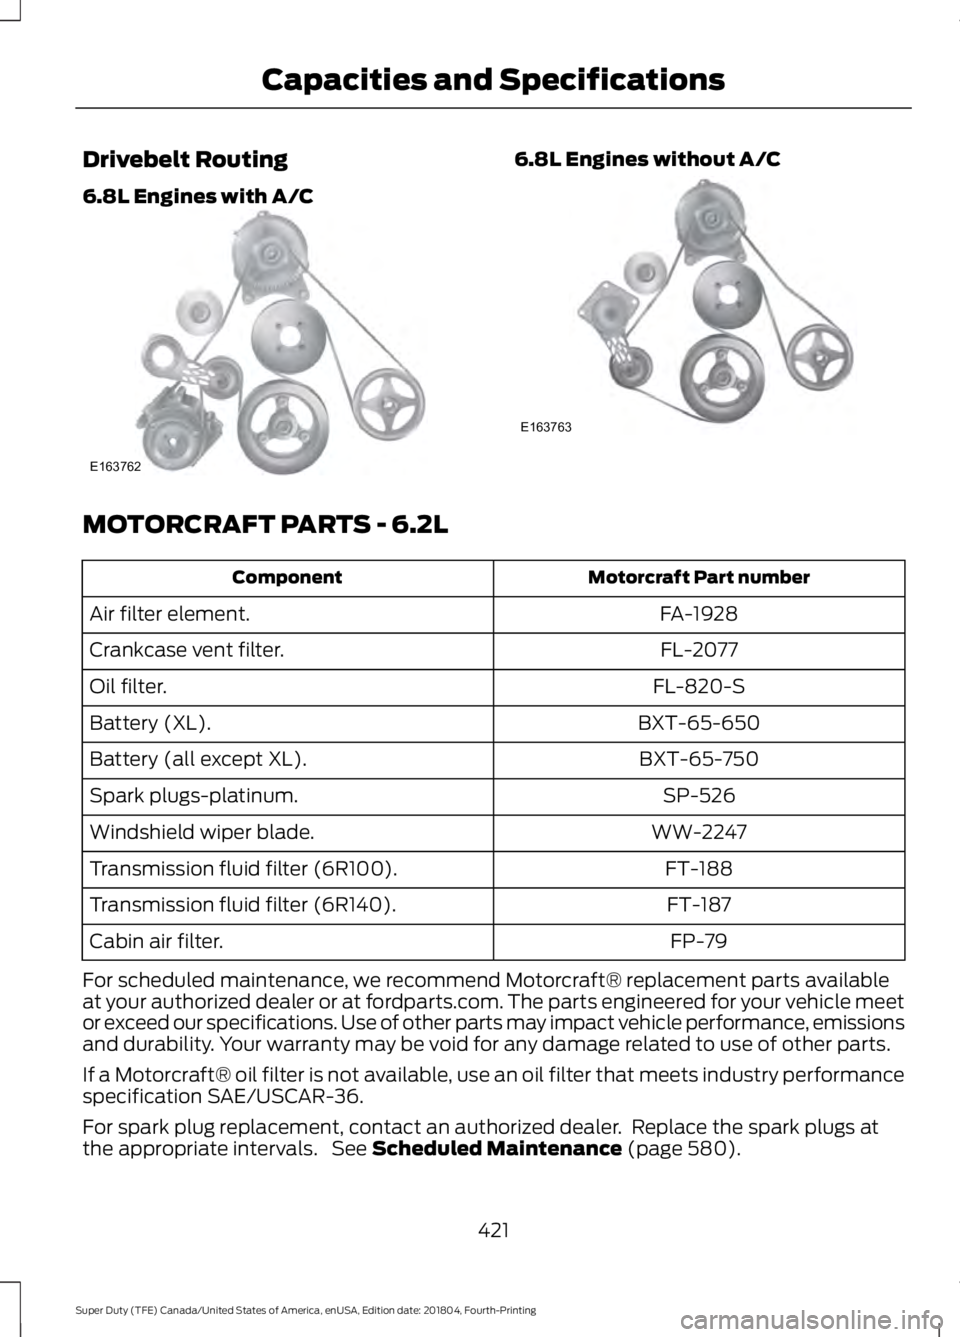 FORD F-350 2019  Owners Manual Drivebelt Routing
6.8L Engines with A/C 6.8L Engines without A/C
MOTORCRAFT PARTS - 6.2L
Motorcraft Part number
Component
FA-1928
Air filter element.
FL-2077
Crankcase vent filter.
FL-820-S
Oil filter